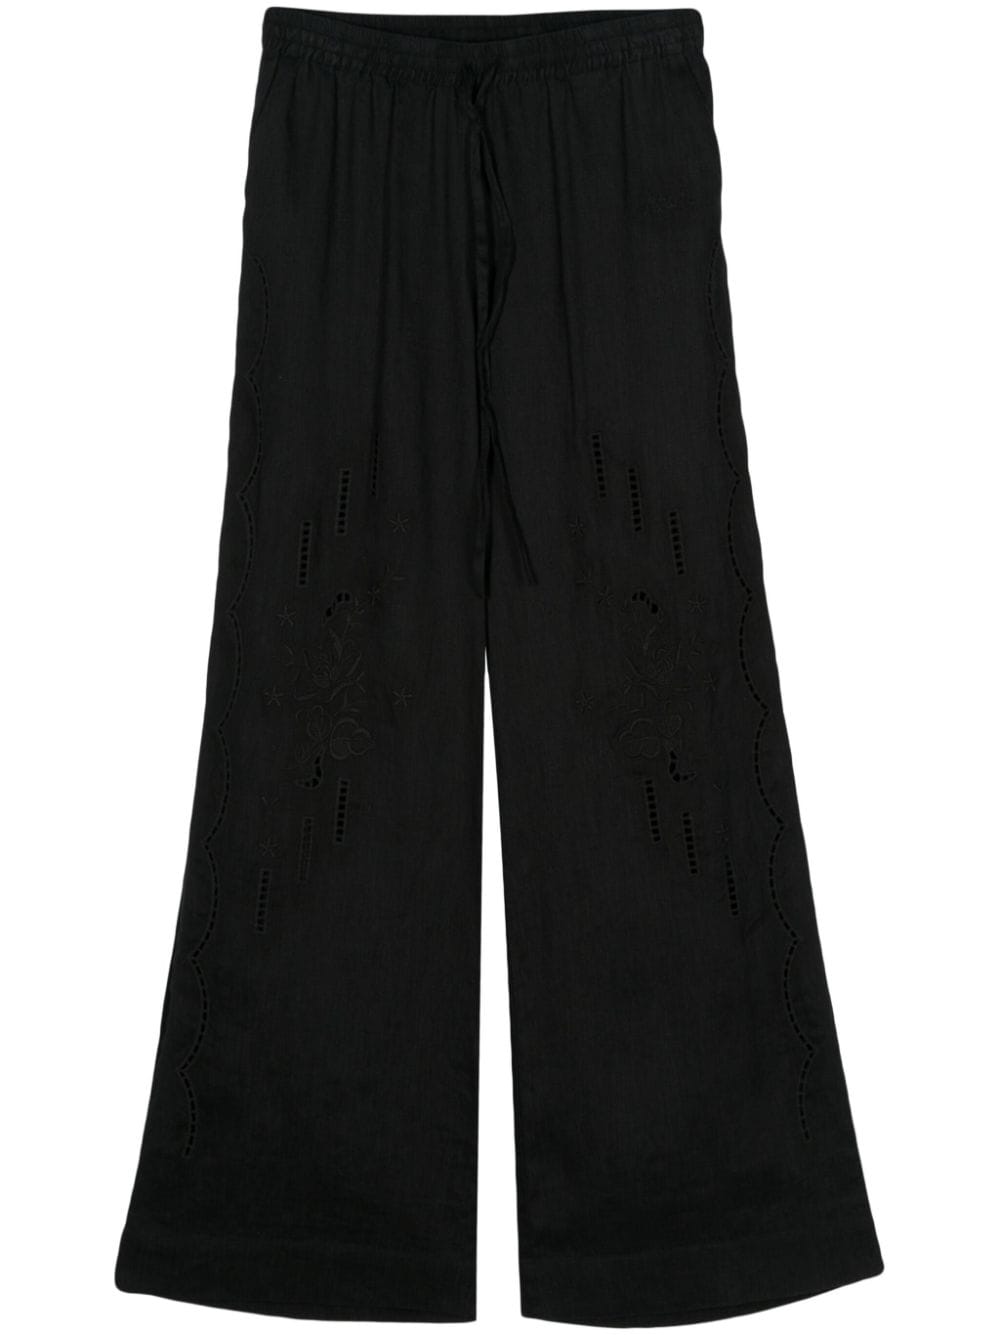 P.A.R.O.S.H. broderie-anglaise linen trousers - Black von P.A.R.O.S.H.